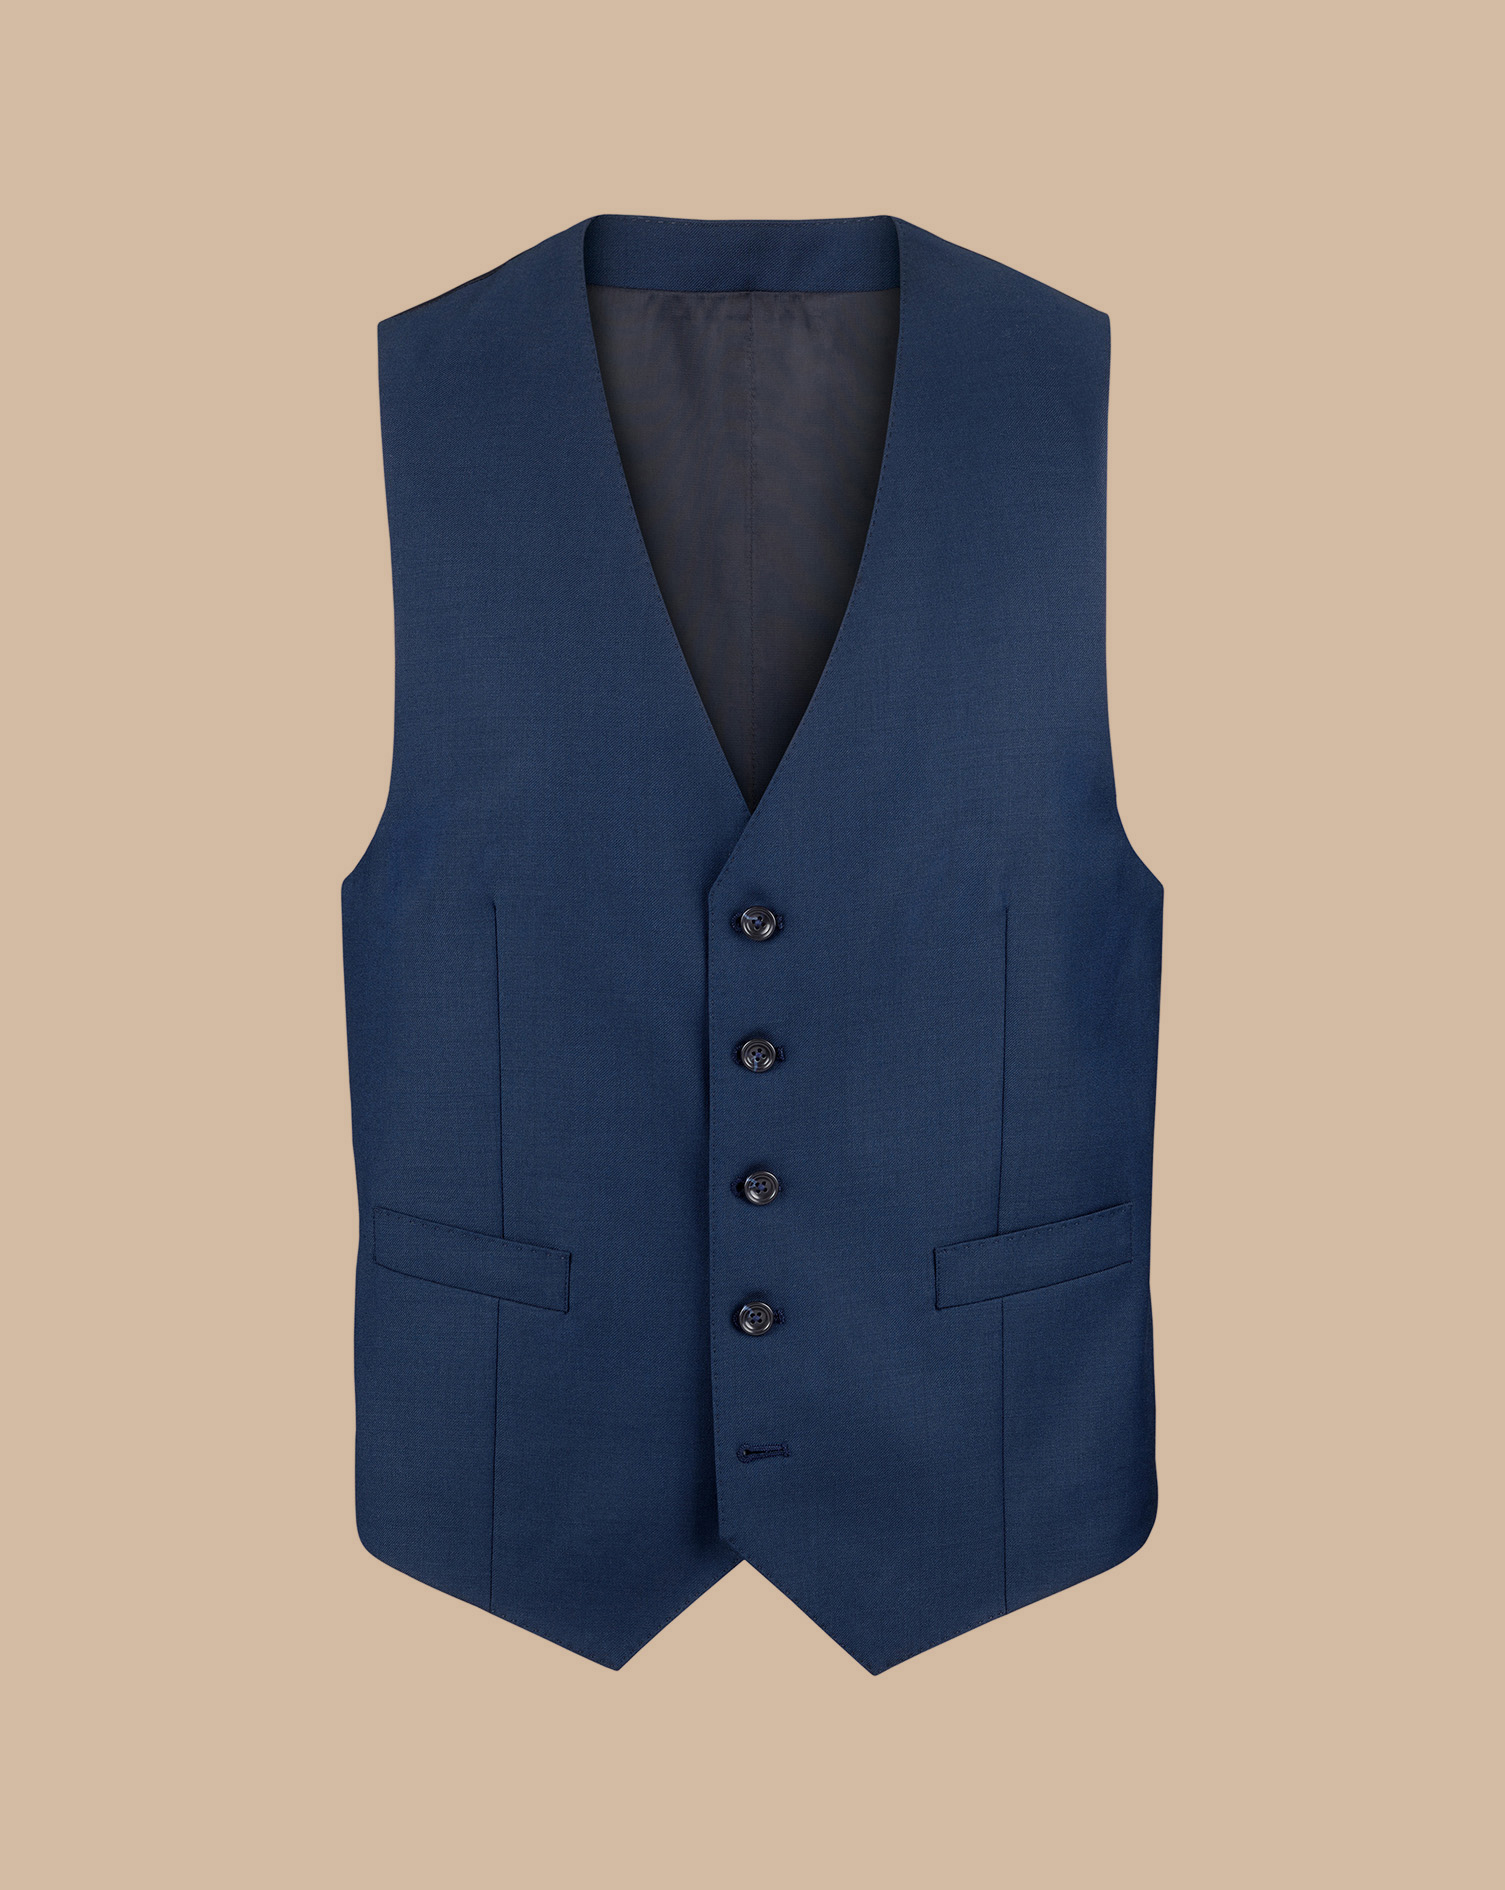 Men's Charles Tyrwhitt Natural Stretch Twill Suit Waistcoat - Royal Blue Size w42 Wool
